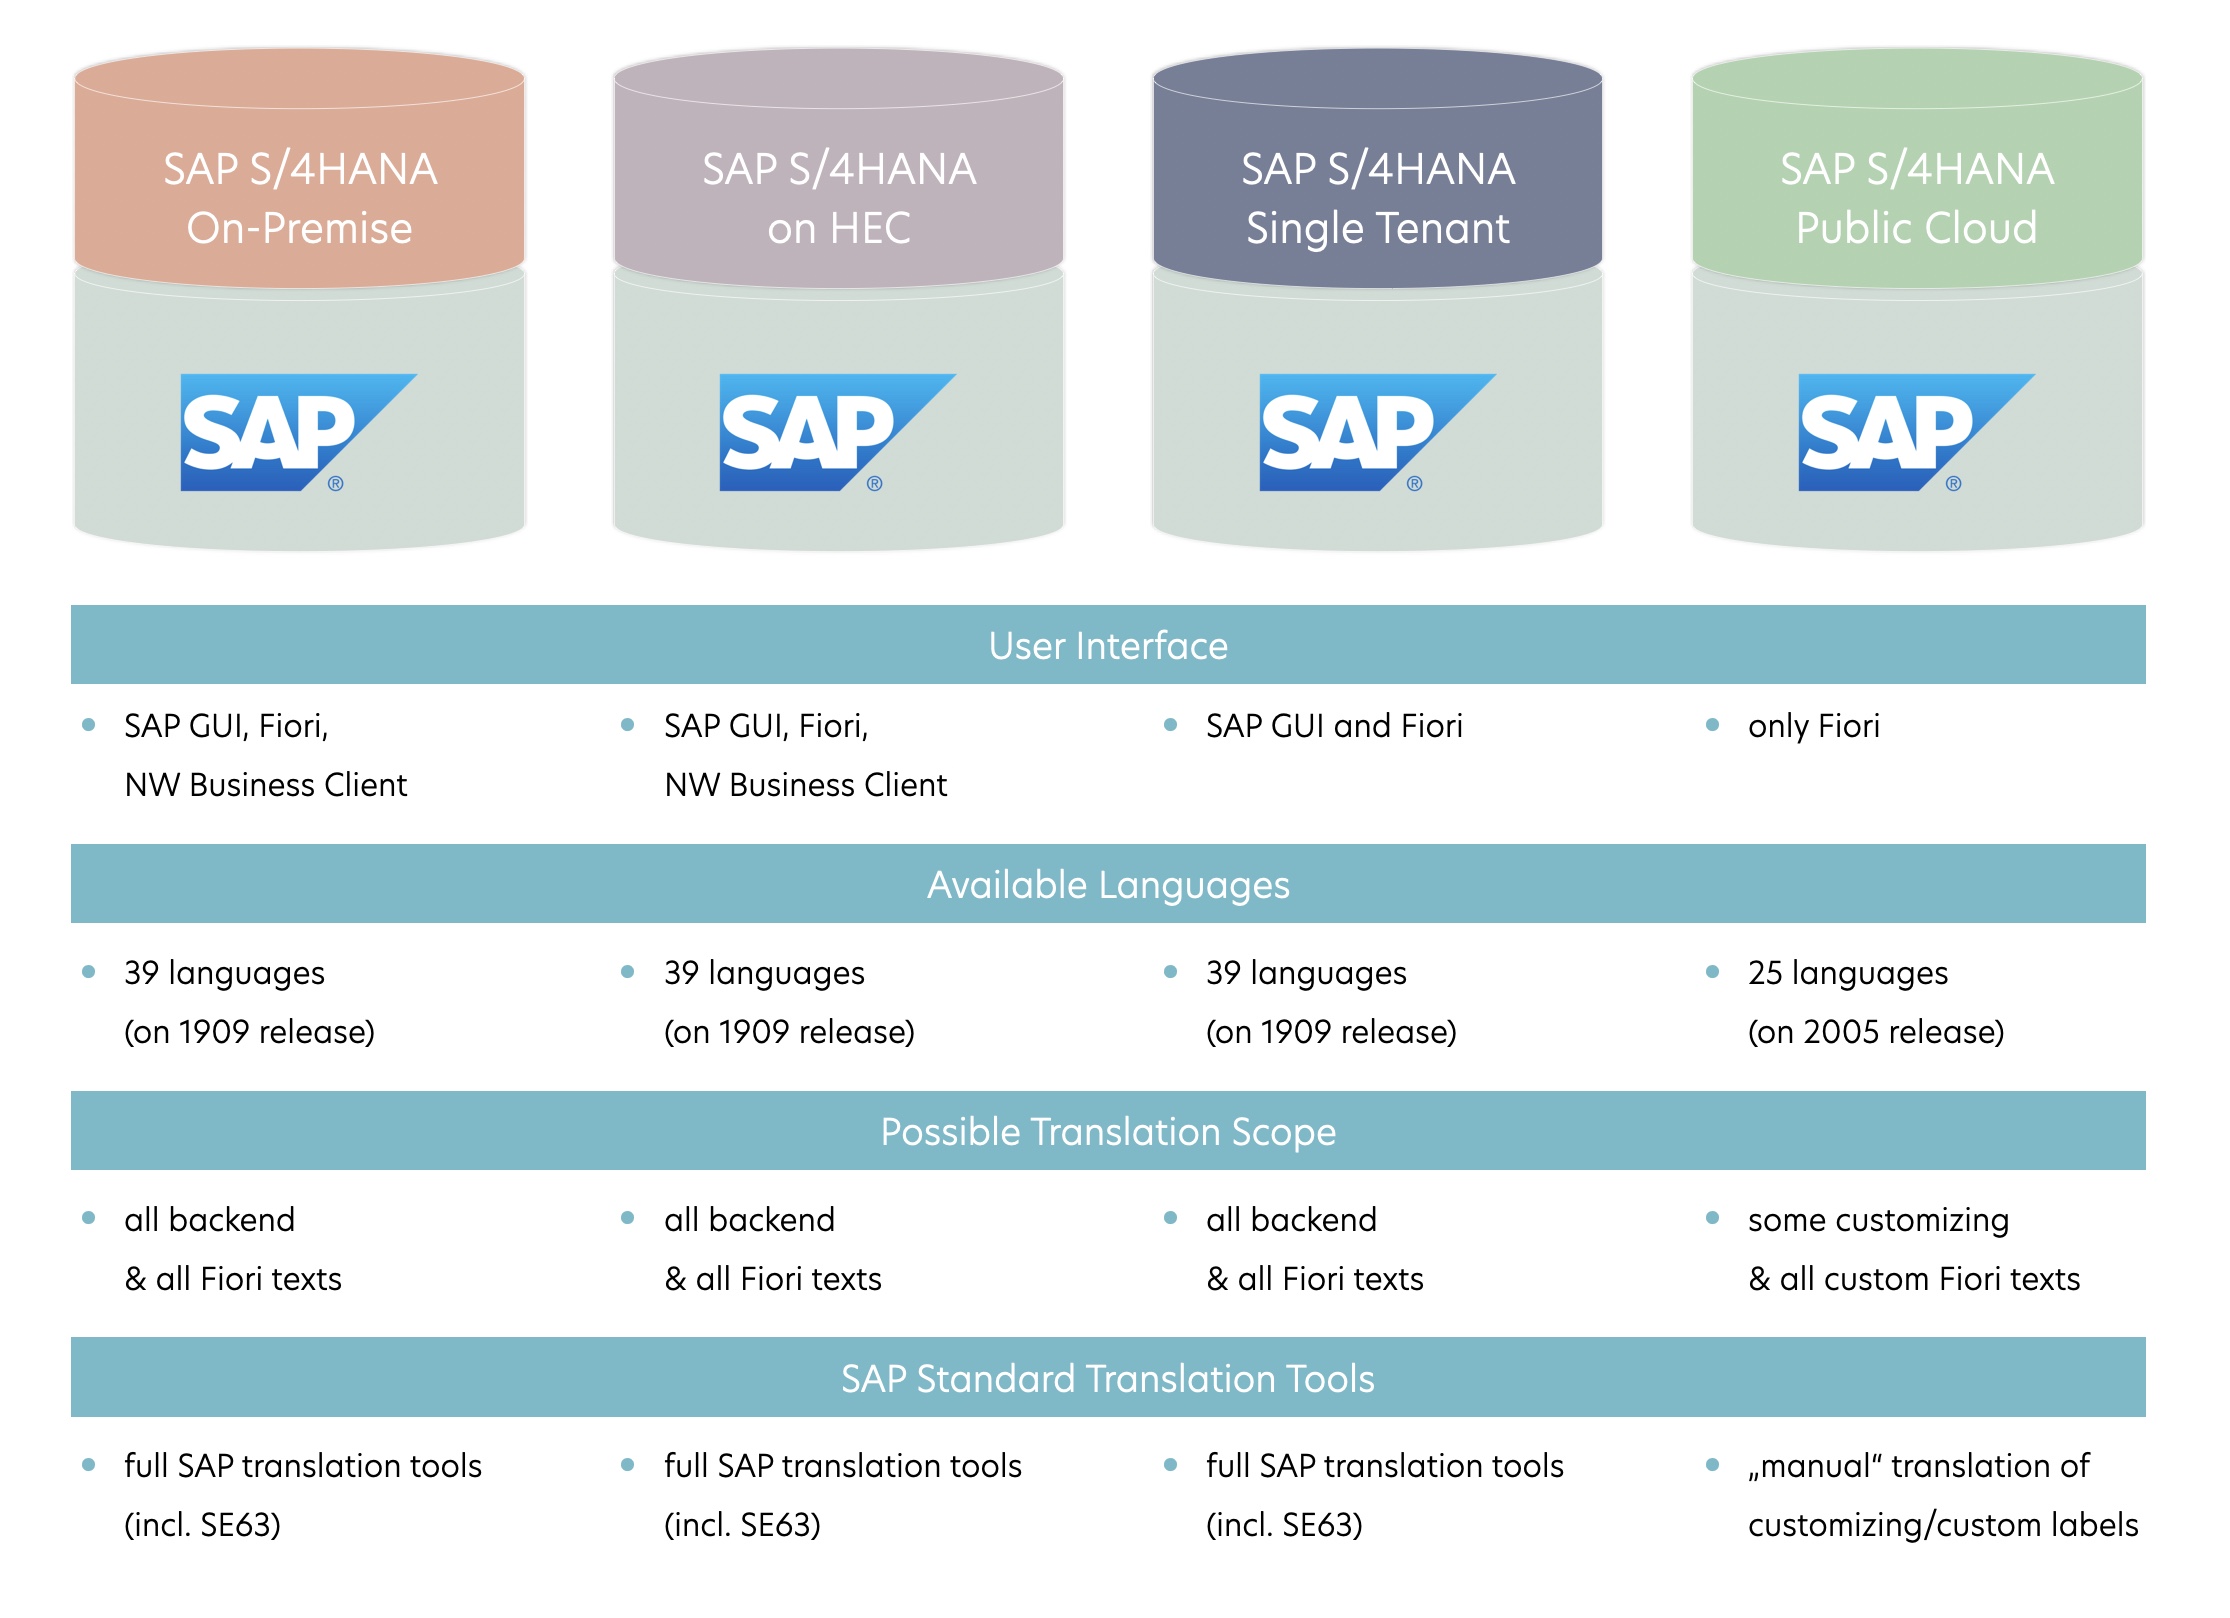 How Do The Sap S Hana Editions Differ When It Comes To Translation